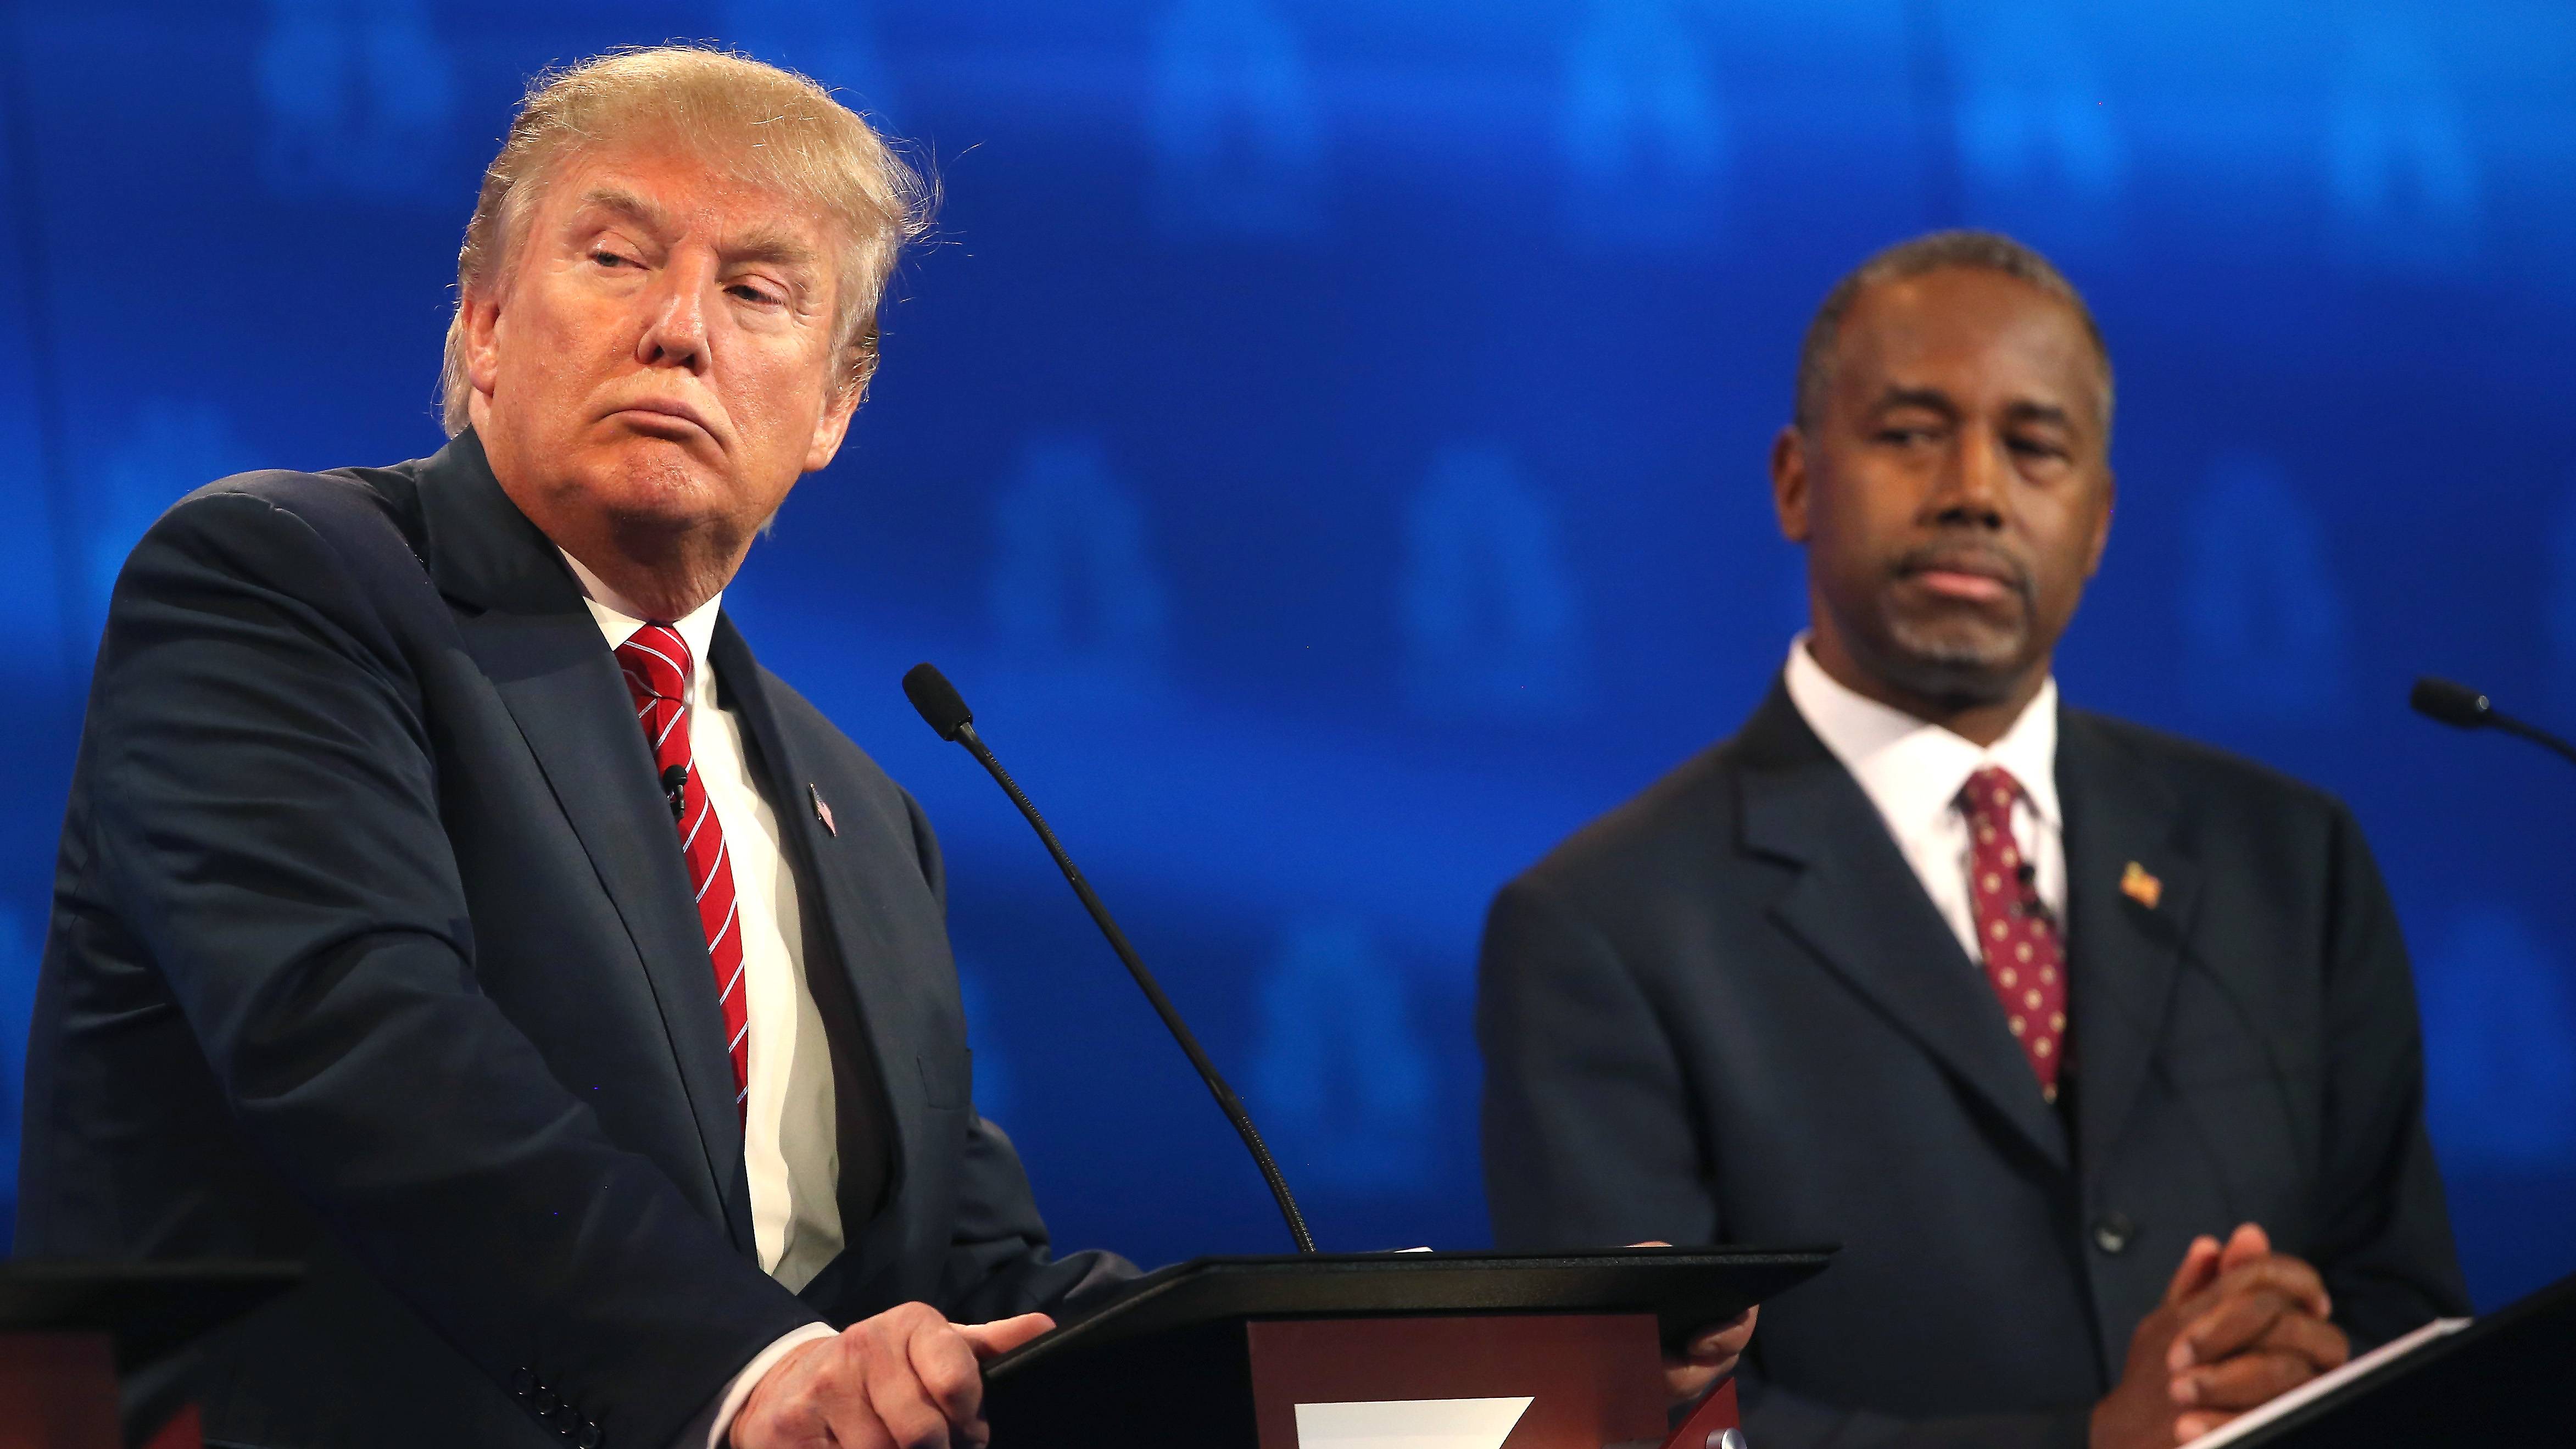 BOULDER, CO - OCTOBER 28:  Presidential candidate Donald Trump pauses while Ben Carson  looks on during the CNBC Republican Presidential Debate at University of Colorados Coors Events Center October 28, 2015 in Boulder, Colorado.  Fourteen Republican presidential candidates are participating in the third set of Republican presidential debates.  (Photo by Justin Sullivan/Getty Images)